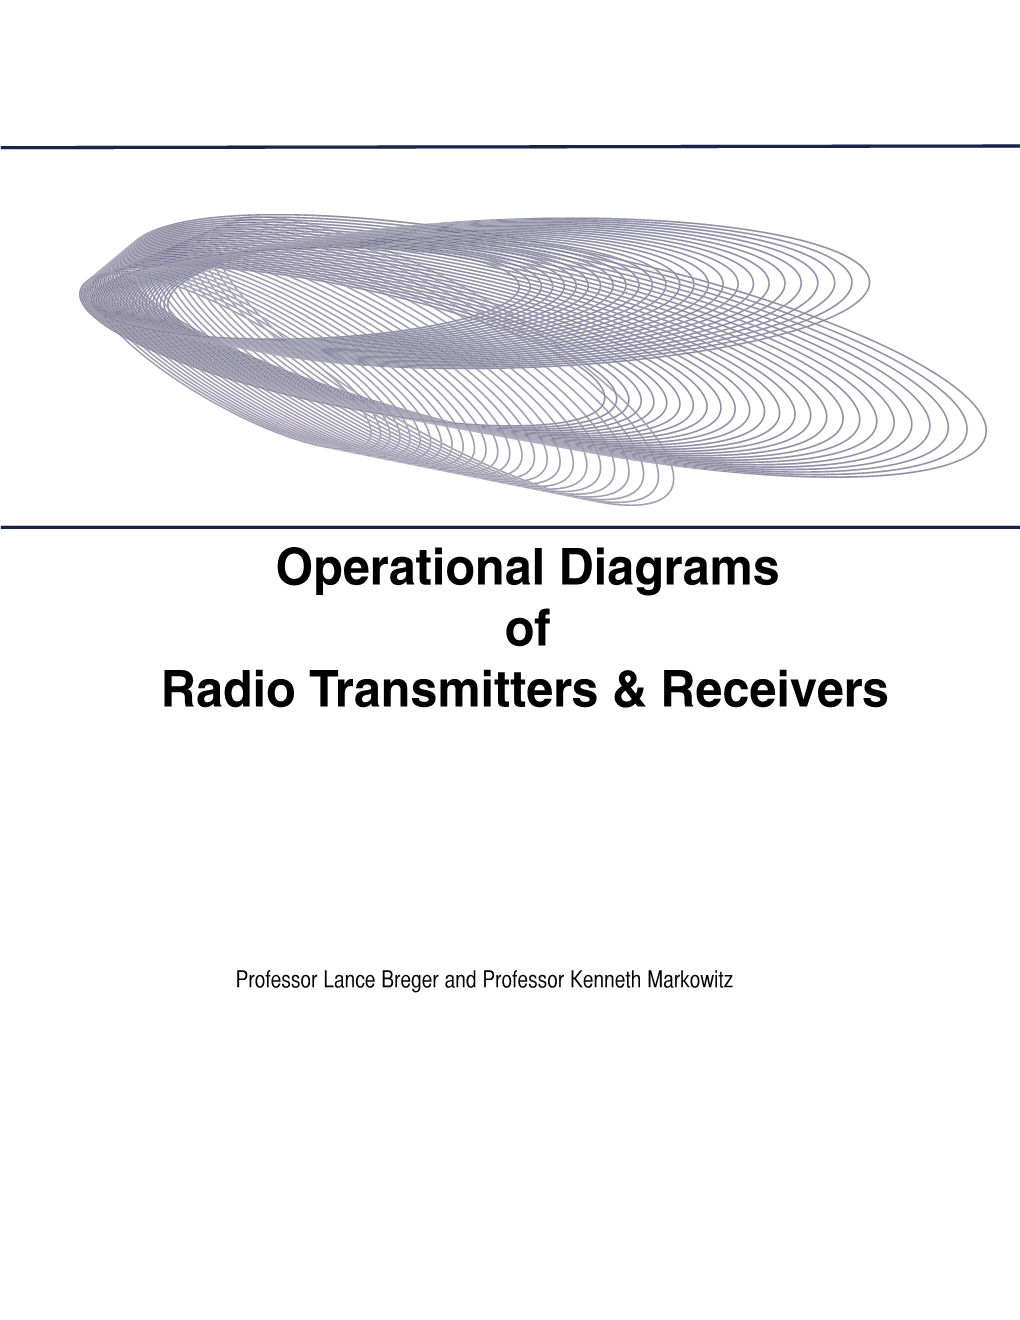 Operational Diagrams of Radio Transmitters & Receivers